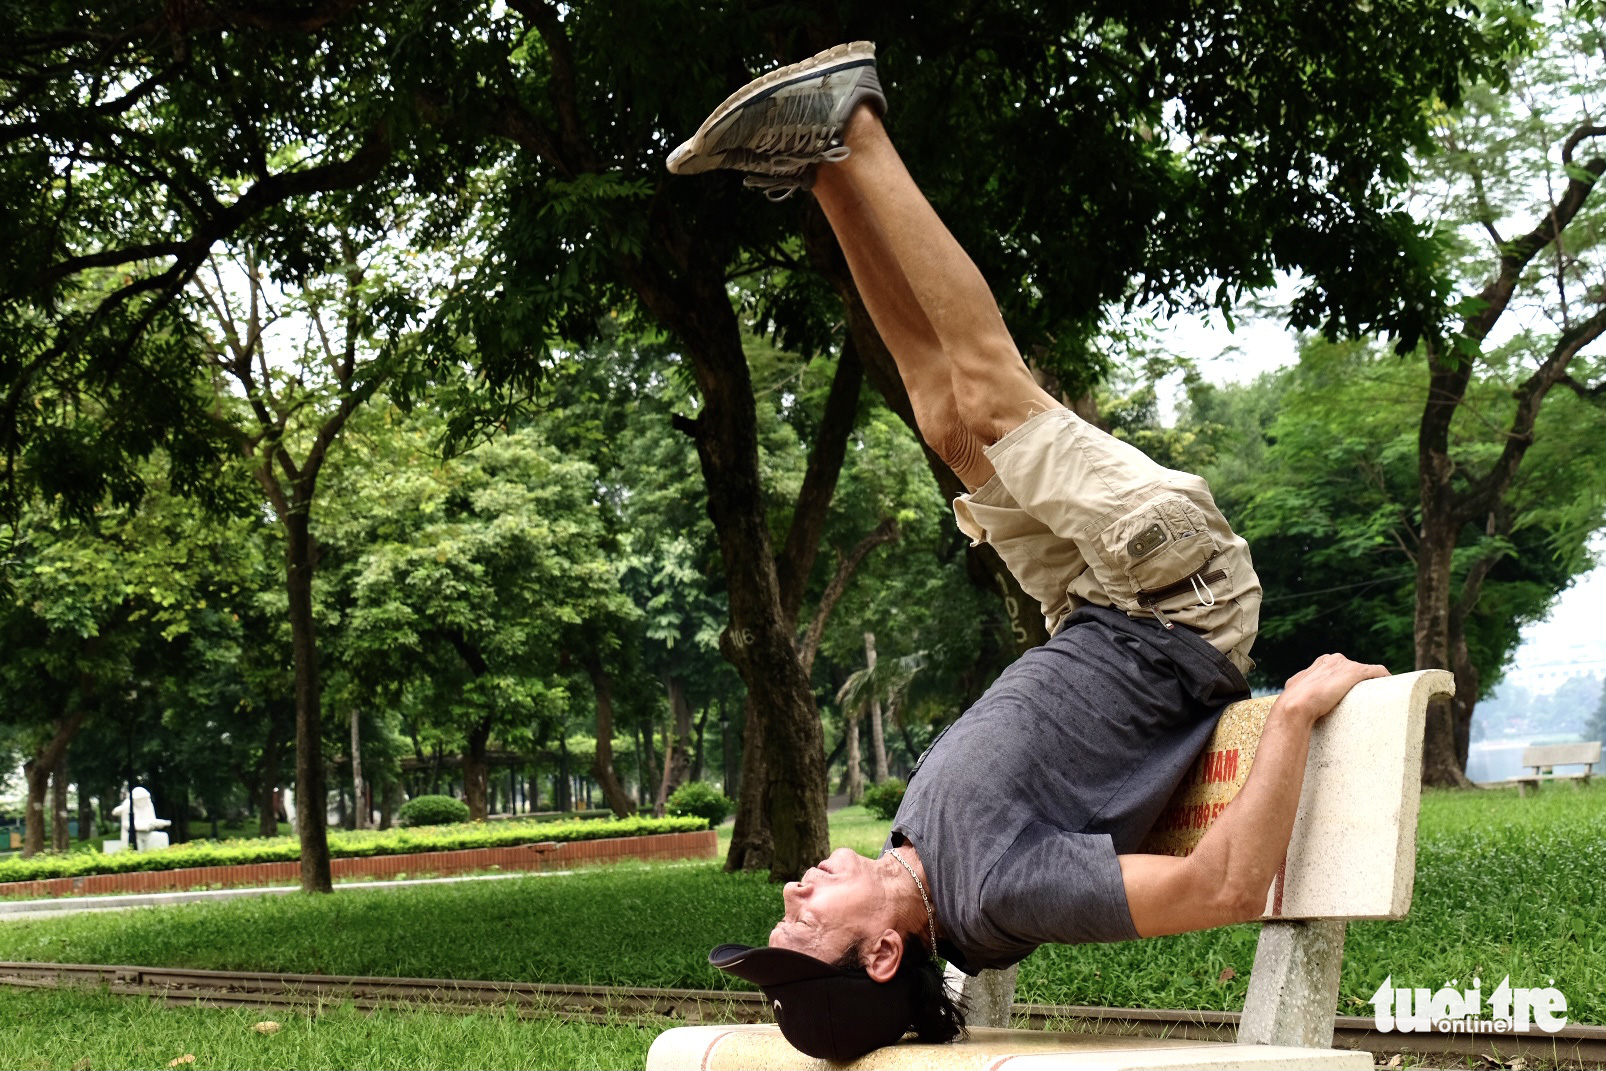 Nguyen Van Tram performs crunches on a stone bench at Thong Nhat Park in Dong Da District, Hanoi. Photo: Nguyen Bao / Tuoi Tre